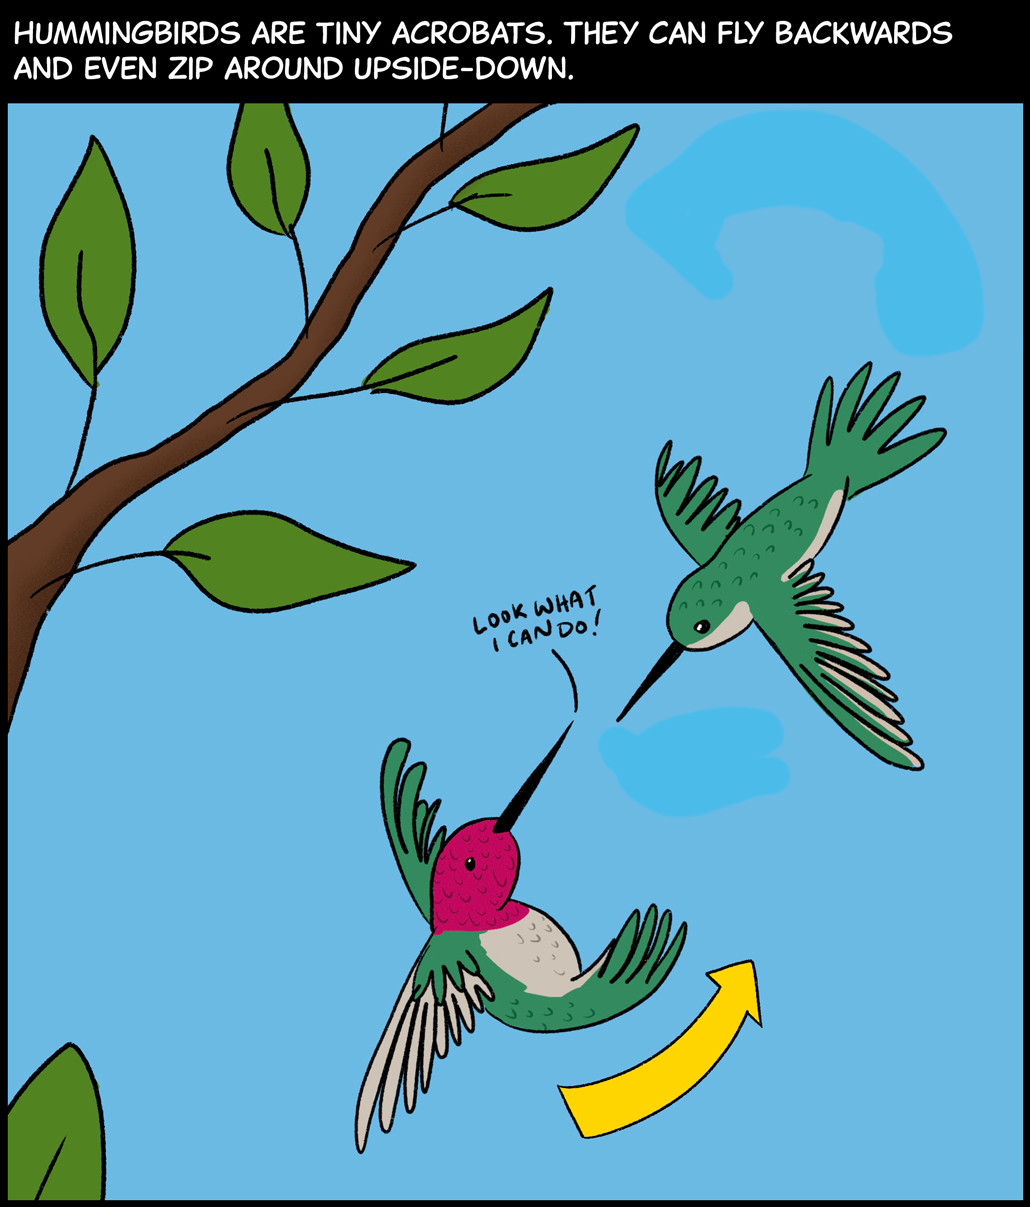 Hummingbirds are tiny acrobats. They can fly backwards and even zip around upside-down. Image: Two hummingbirds fly through a blue sky with a tree branch in the background. One hummingbird with magenta, green and white feathers is flying upside-down. He is looking up at another hummingbird with green and white feathers and saying, “Look what I can do!”